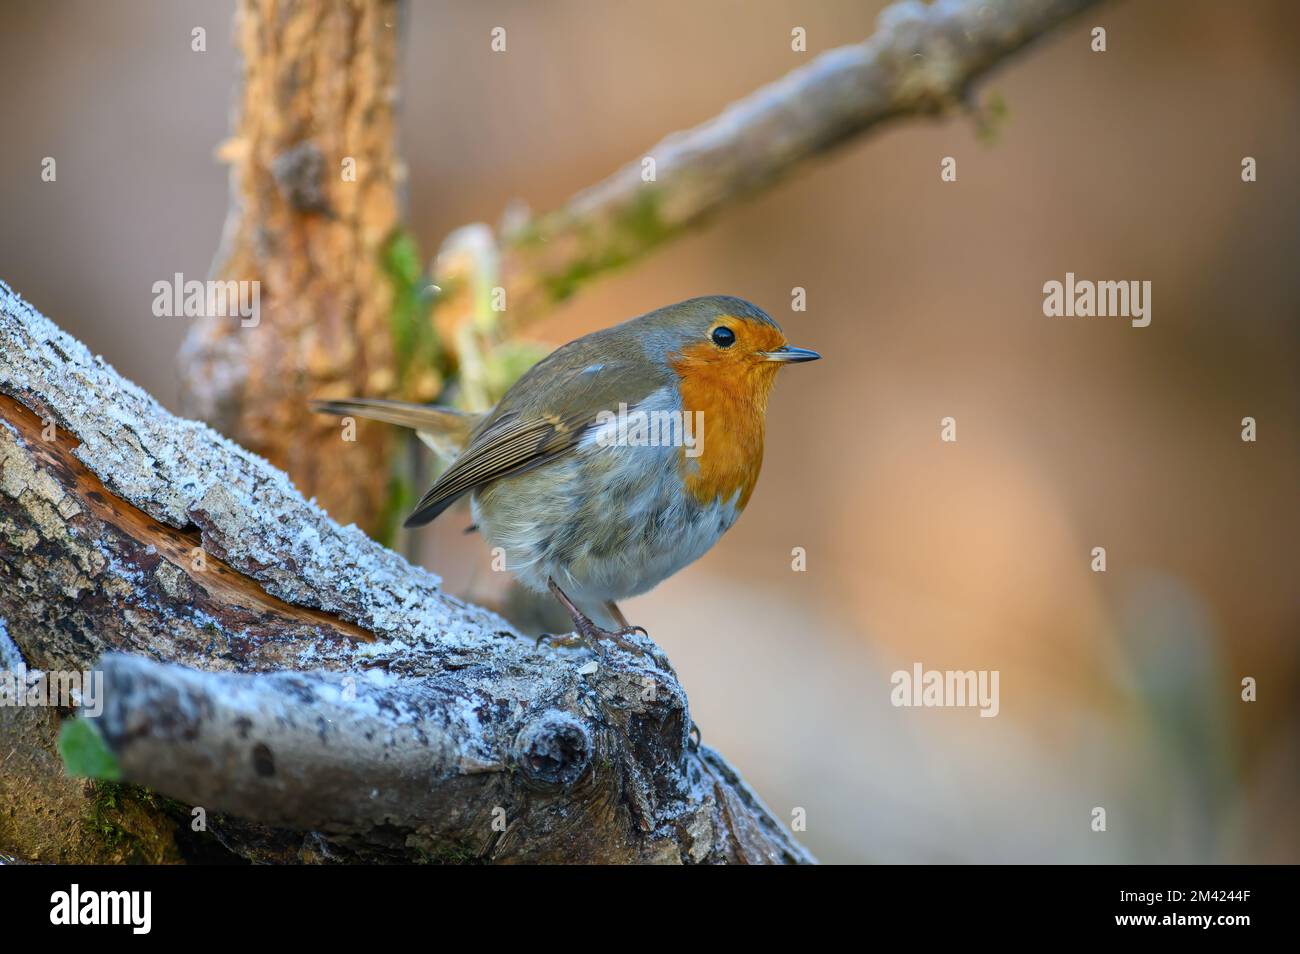 Robin, Erithacus rubecula, perched on a frosty branch, looking right Stock Photo